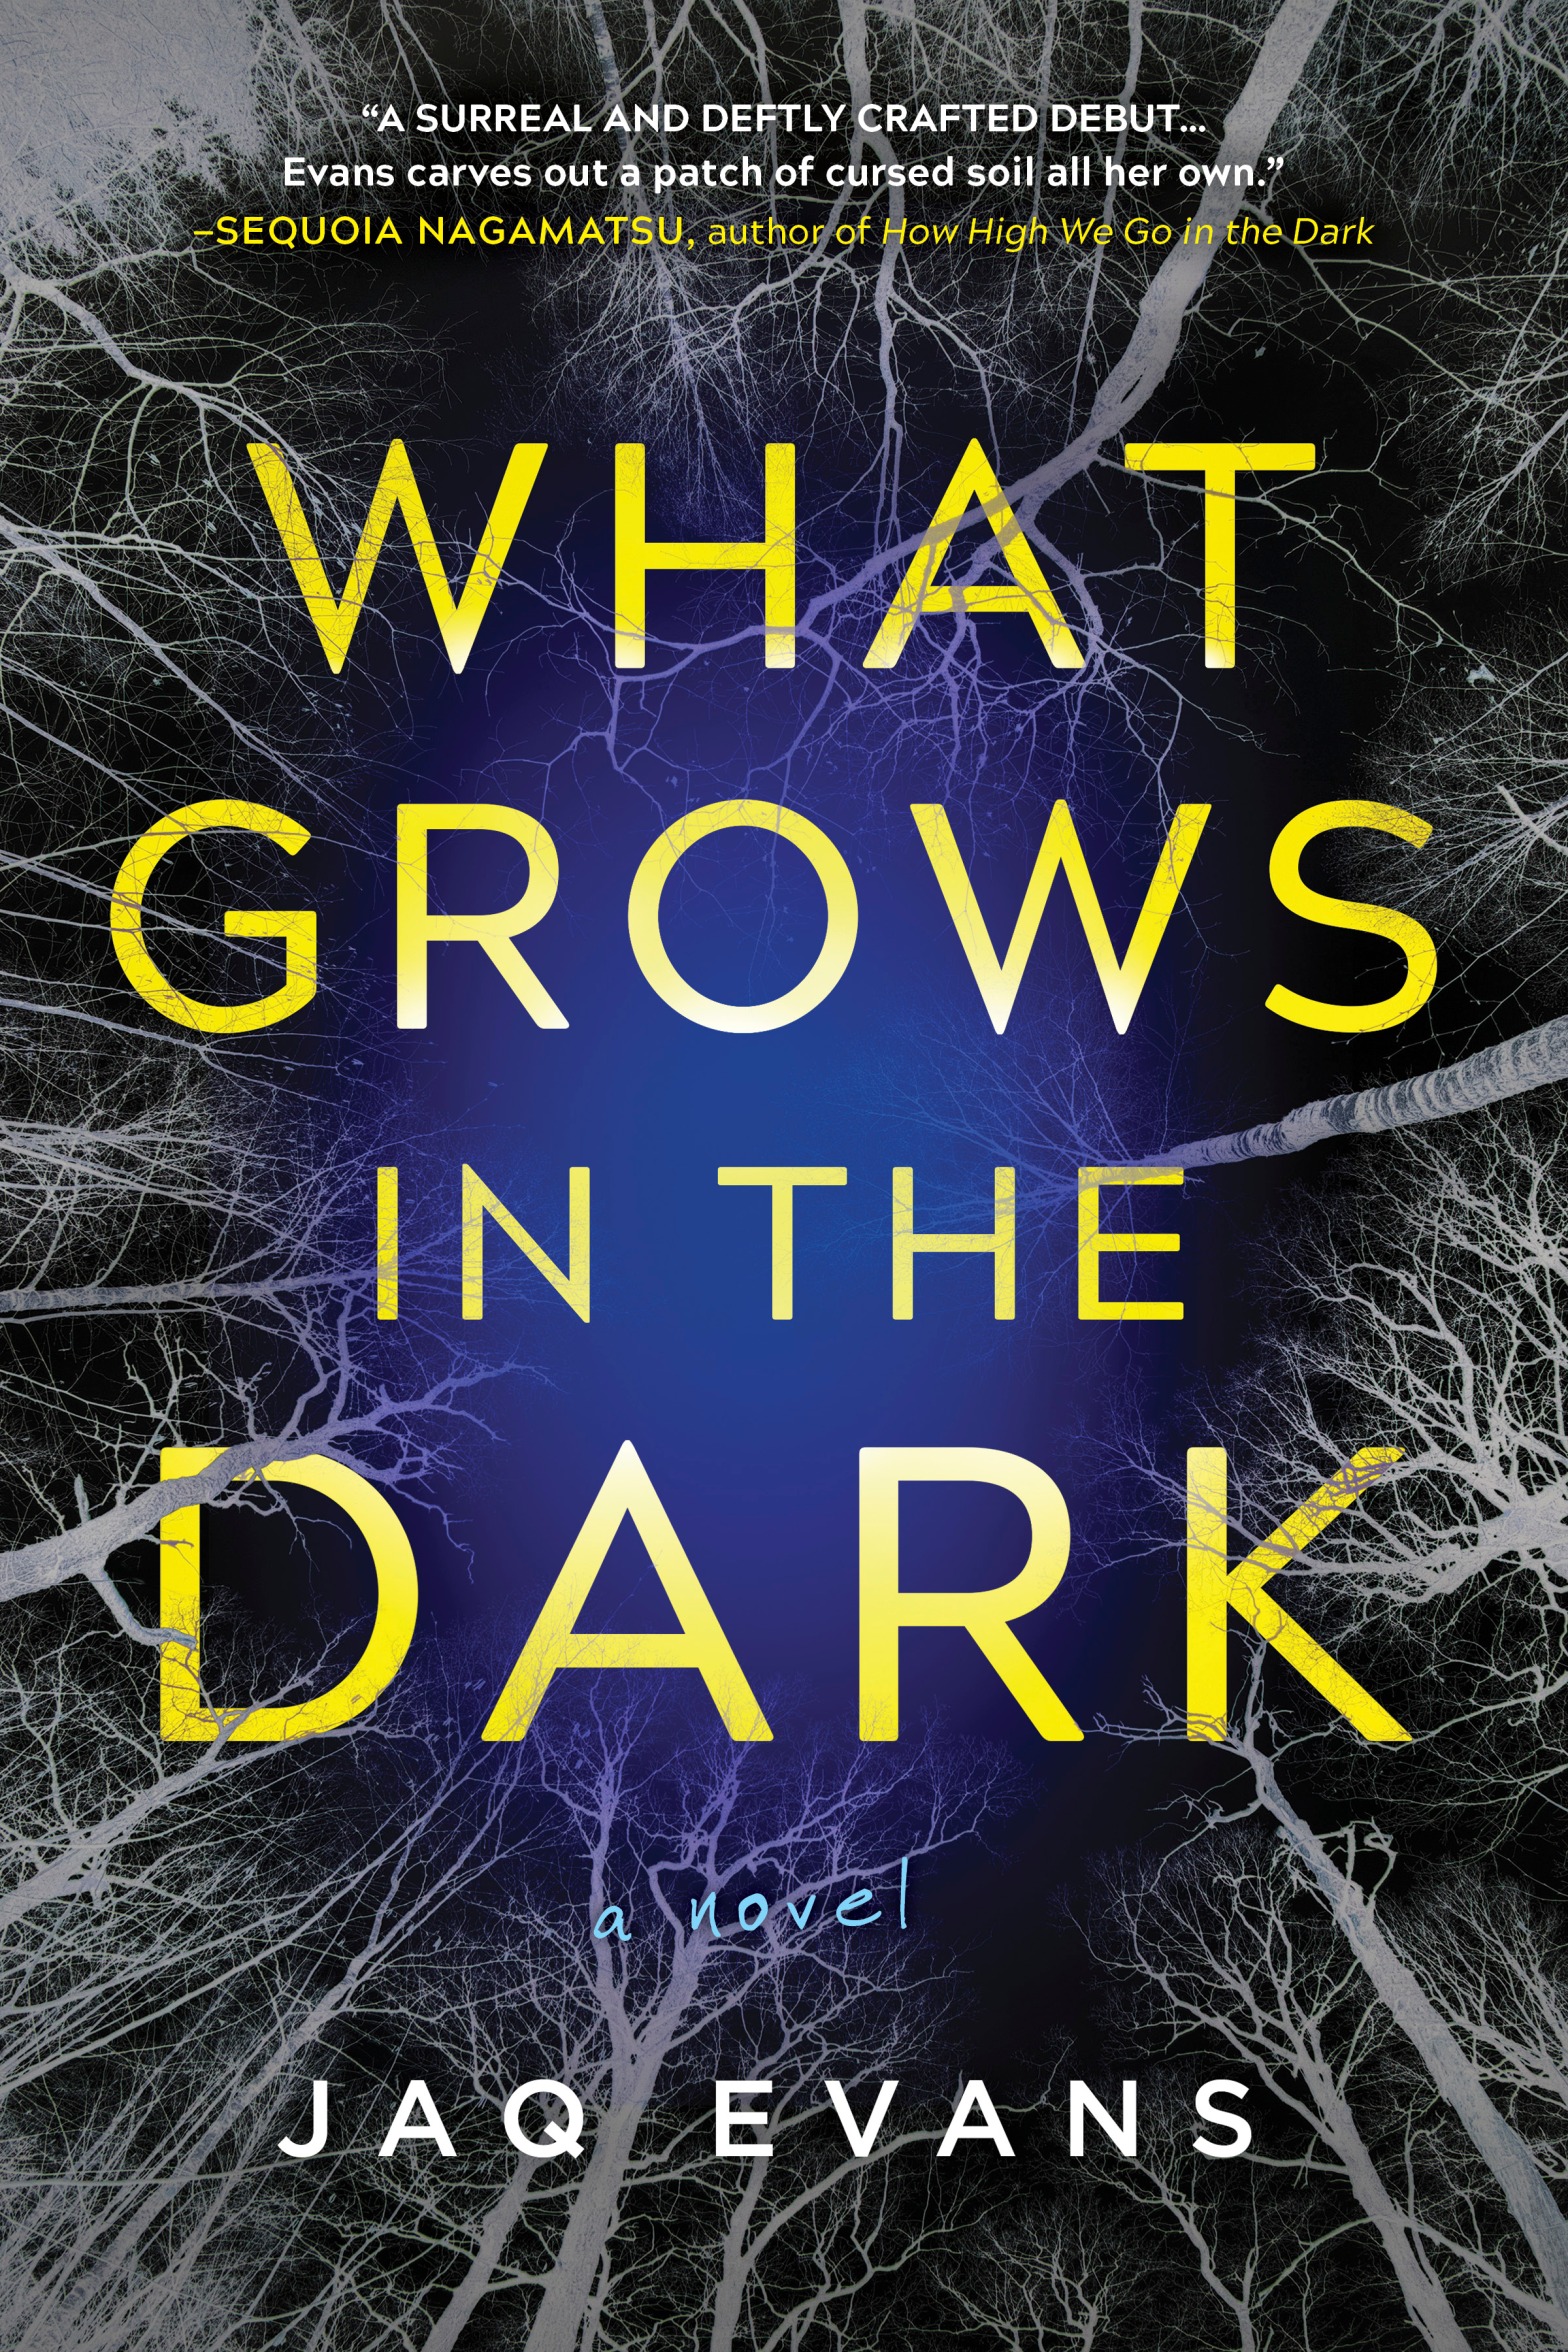 WHAT GROWS IN THE DARK by Jaq Evans blog tour and excerpt!